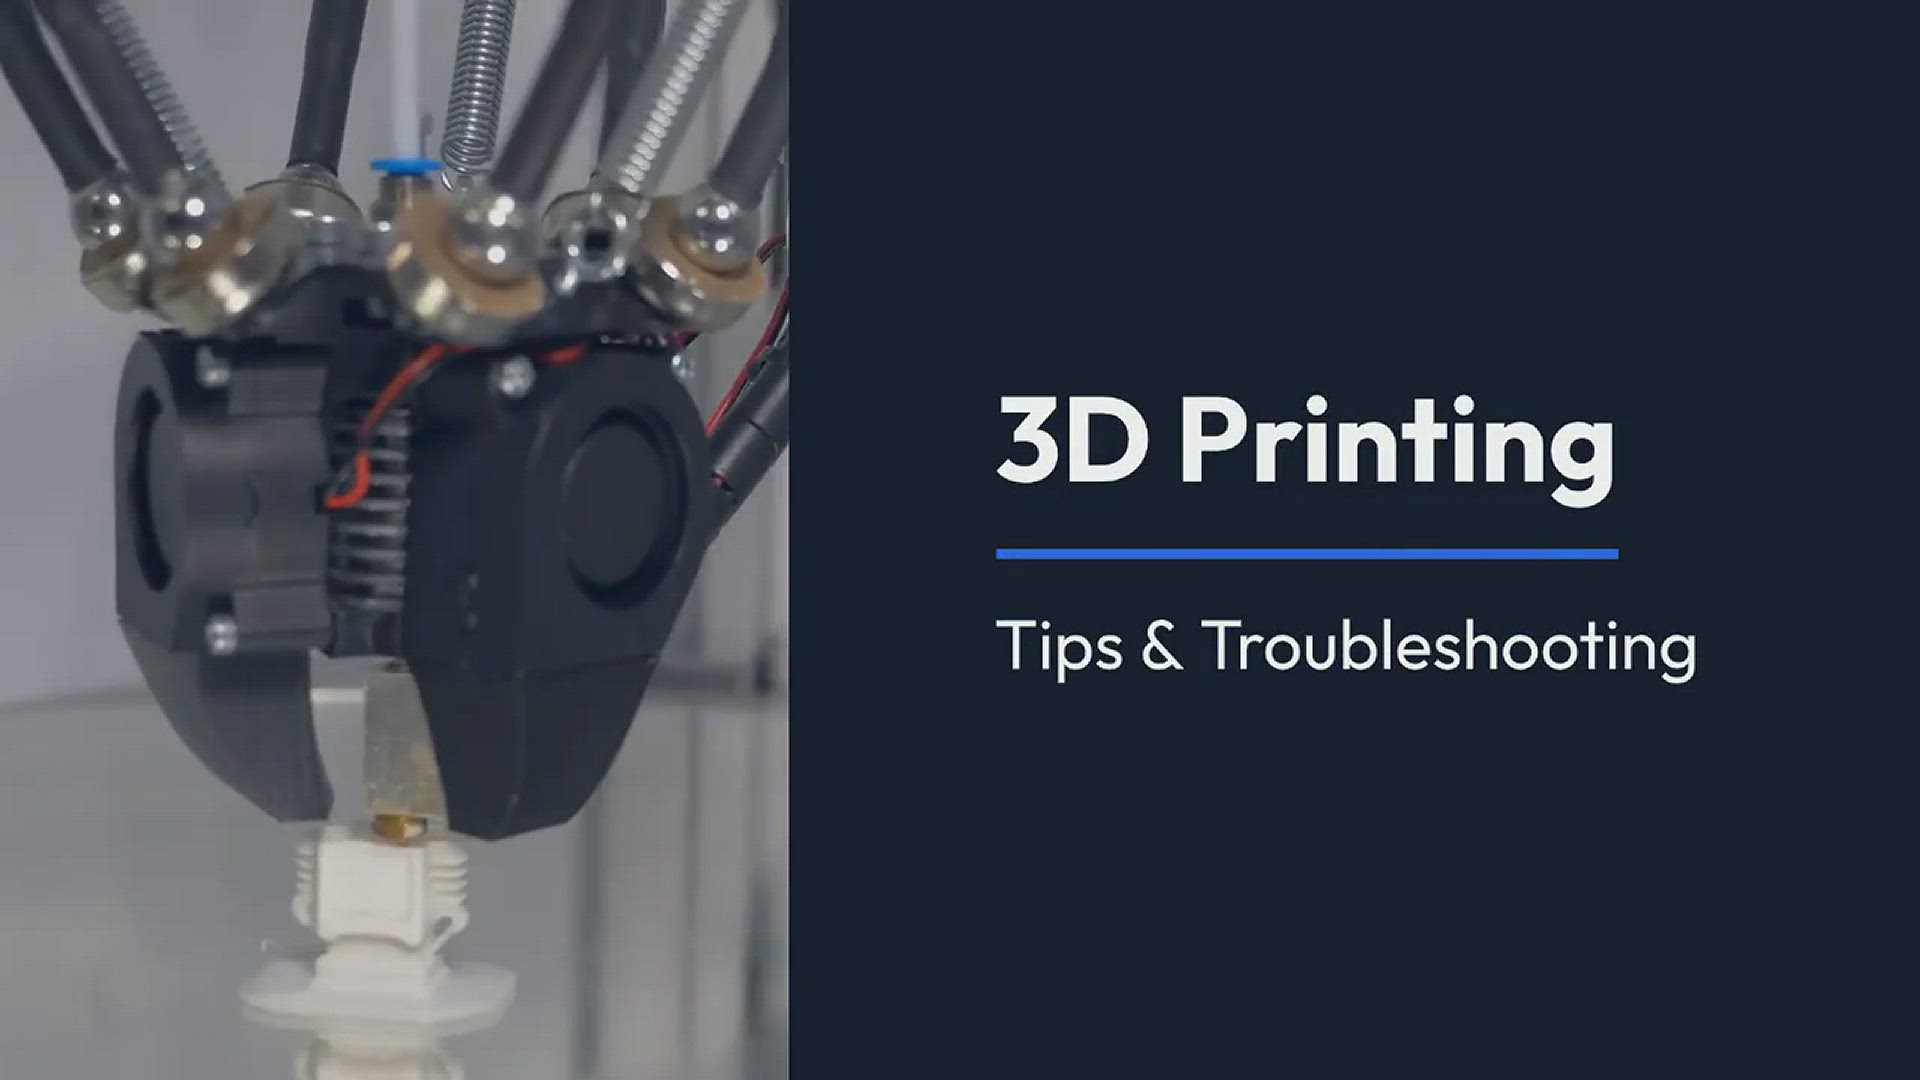 'Video thumbnail for 3D Printing Troubleshooting Tips'